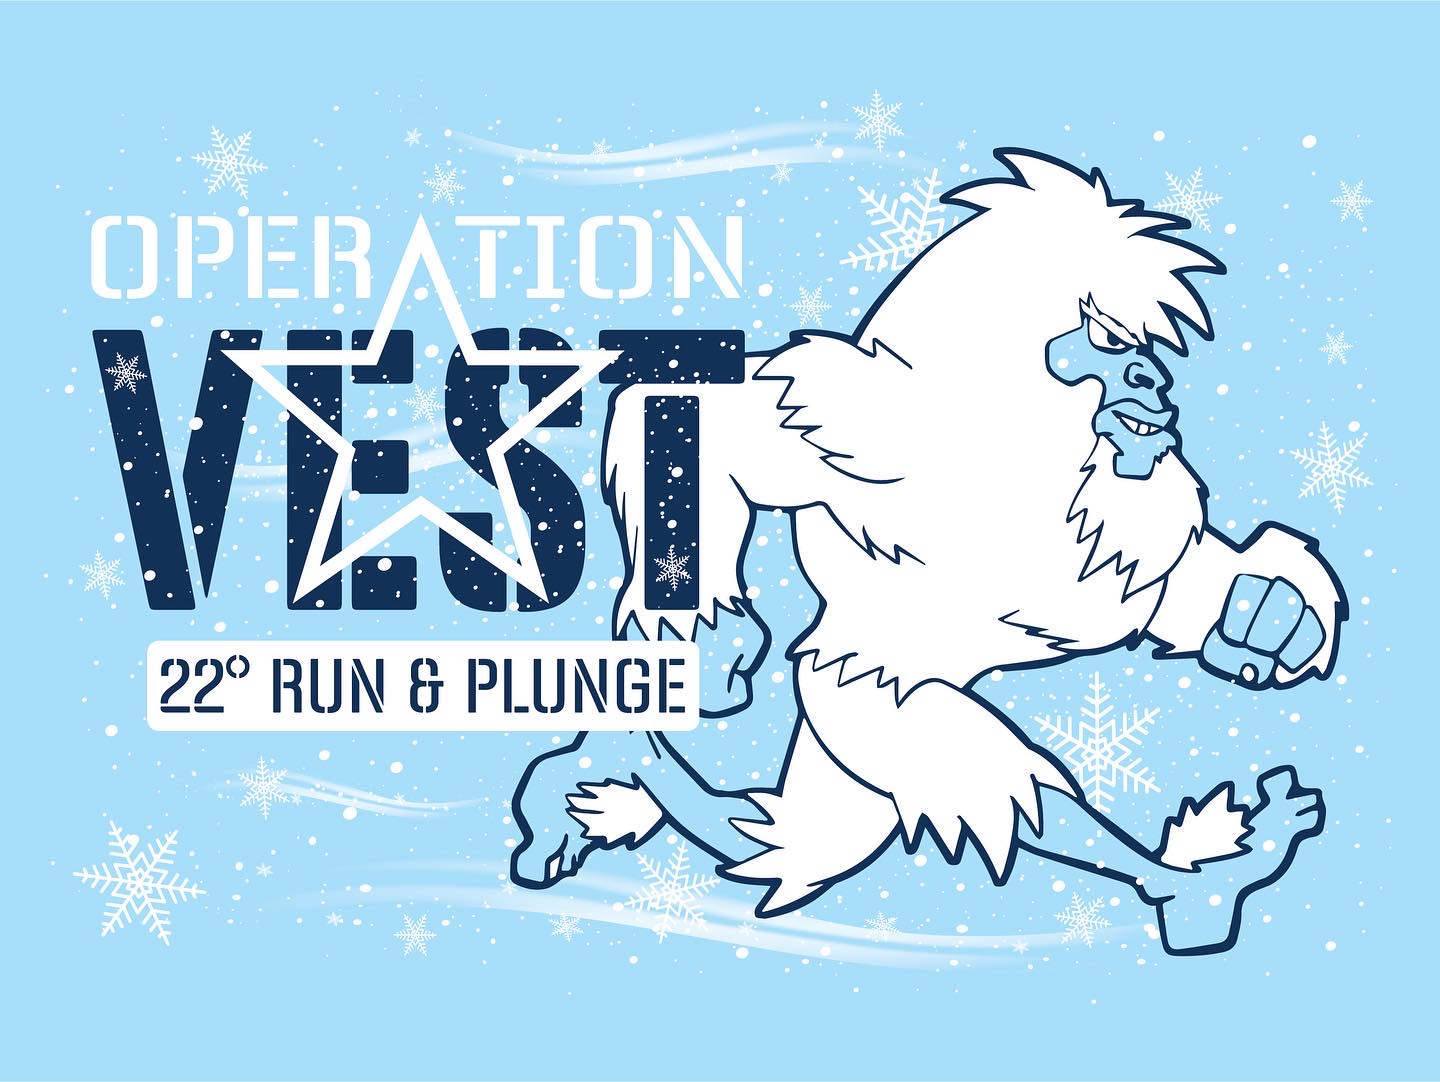 2nd Annual 22° Run & Plunge- PAST EVENT